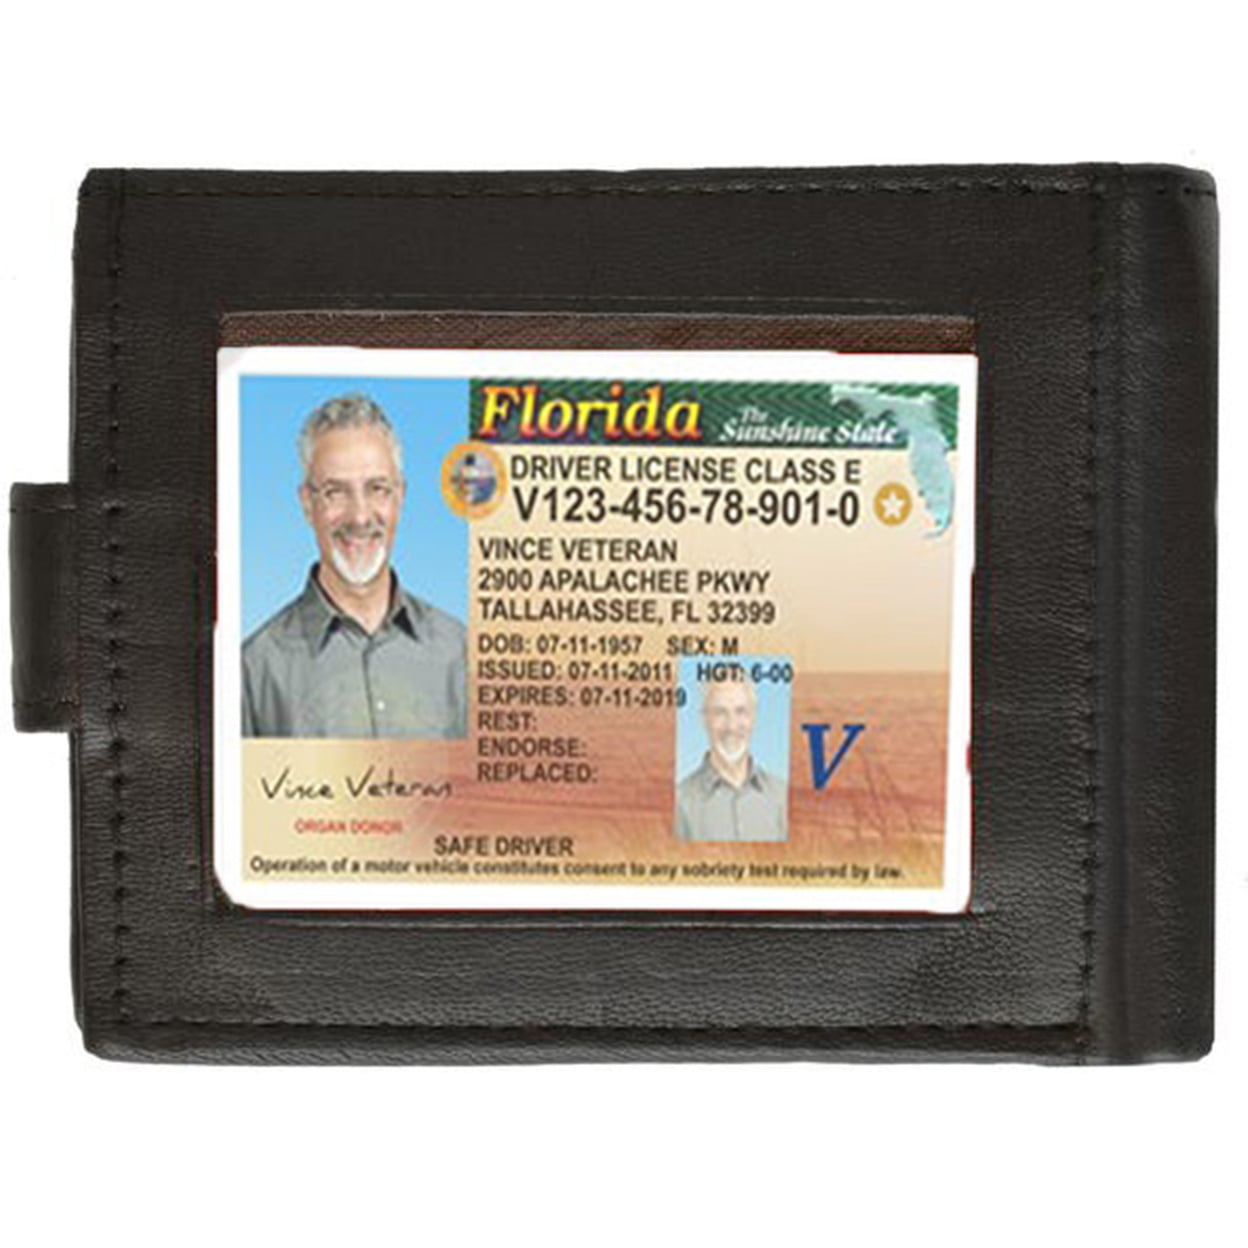 ID card 24-50 Card Case ID windows BNWT picture Holder Leather Credit Card 